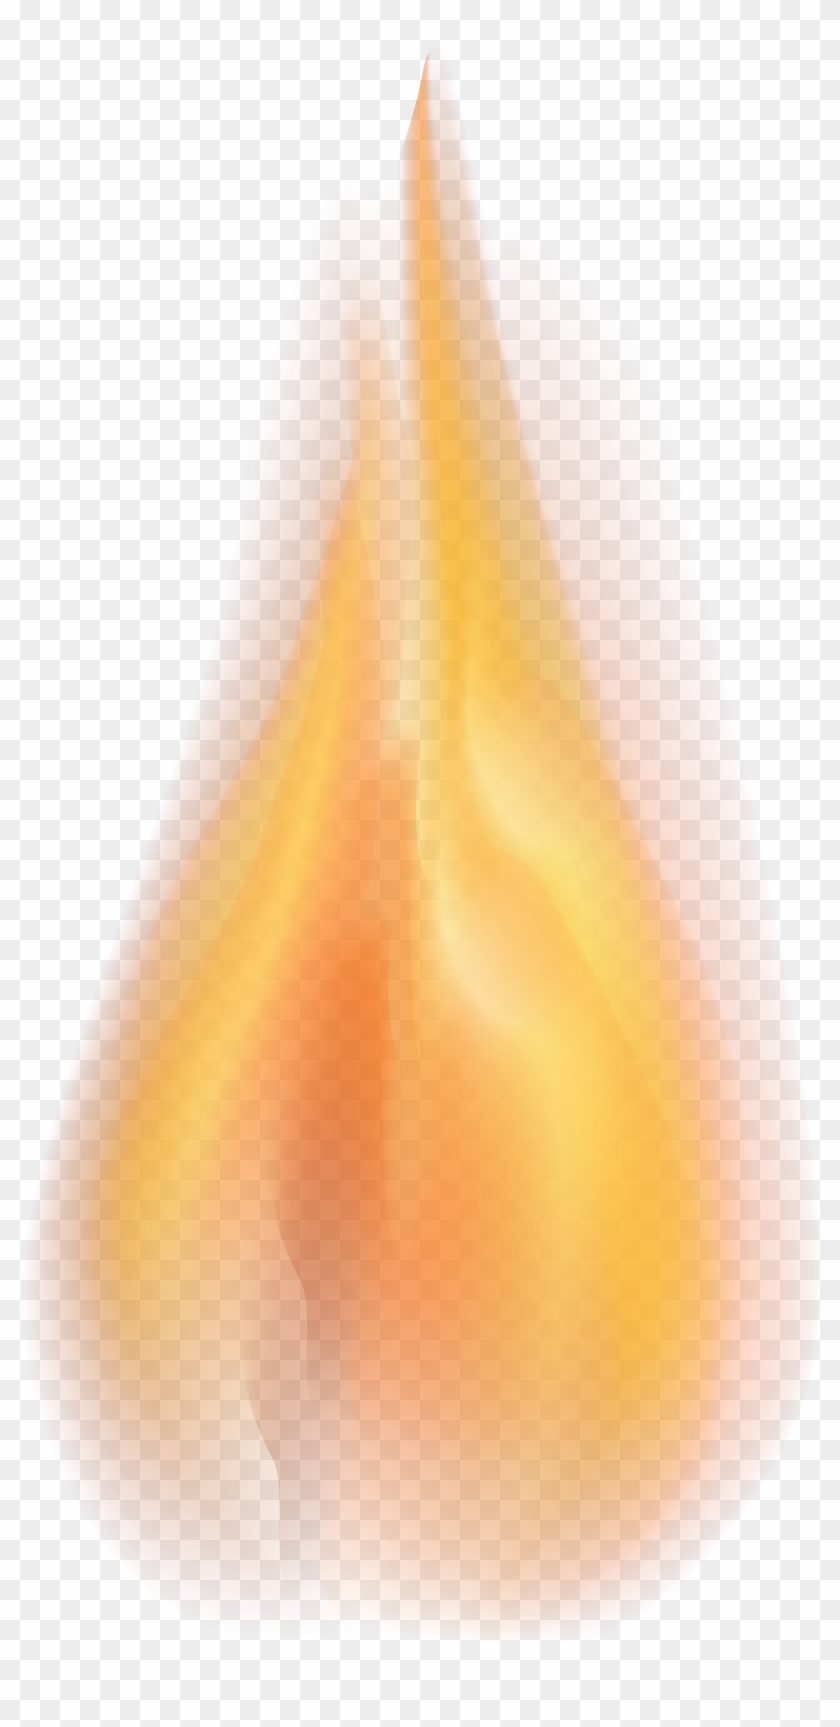 Transparent Fire Flame Png #480580